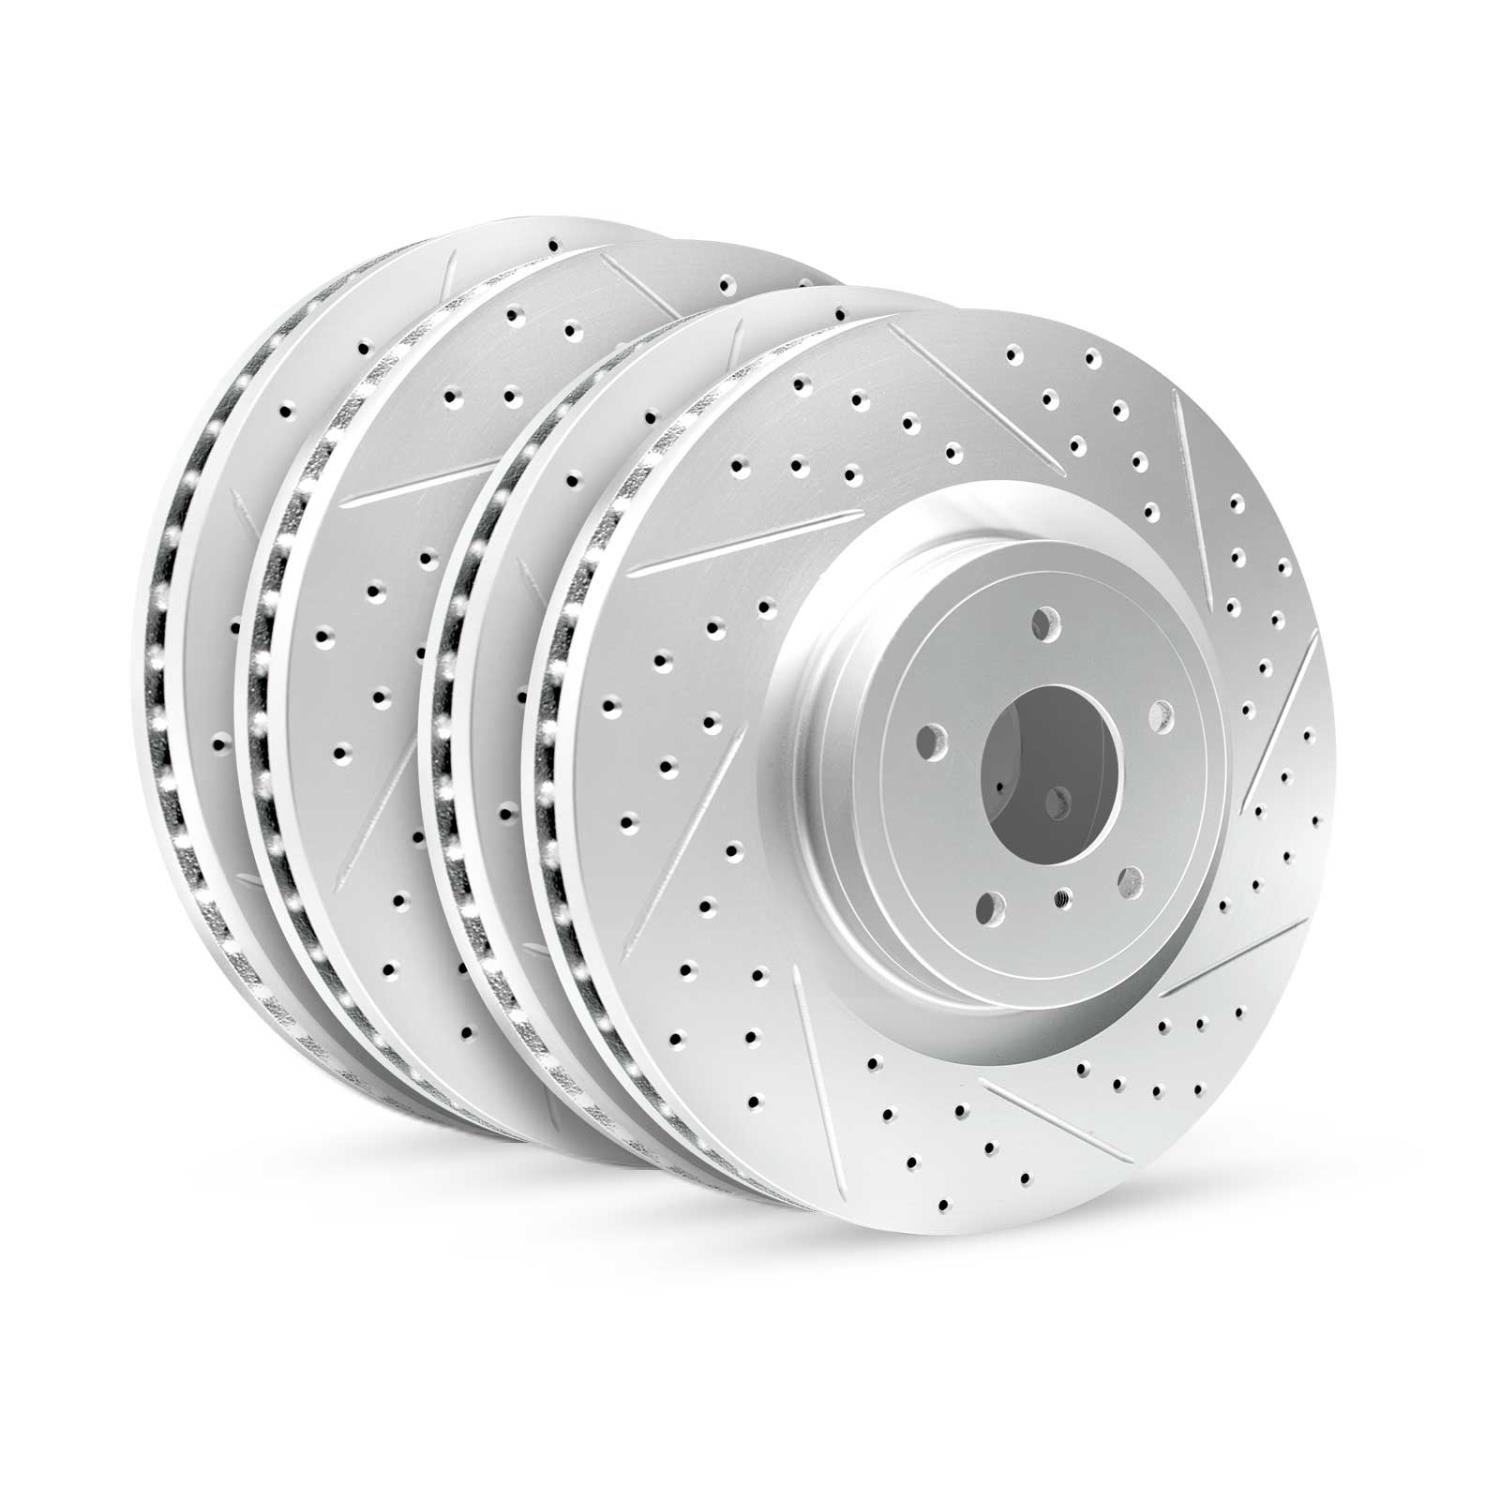 GEO-Carbon Drilled/Slotted Rotors, 2018-2021 Ford/Mazda,